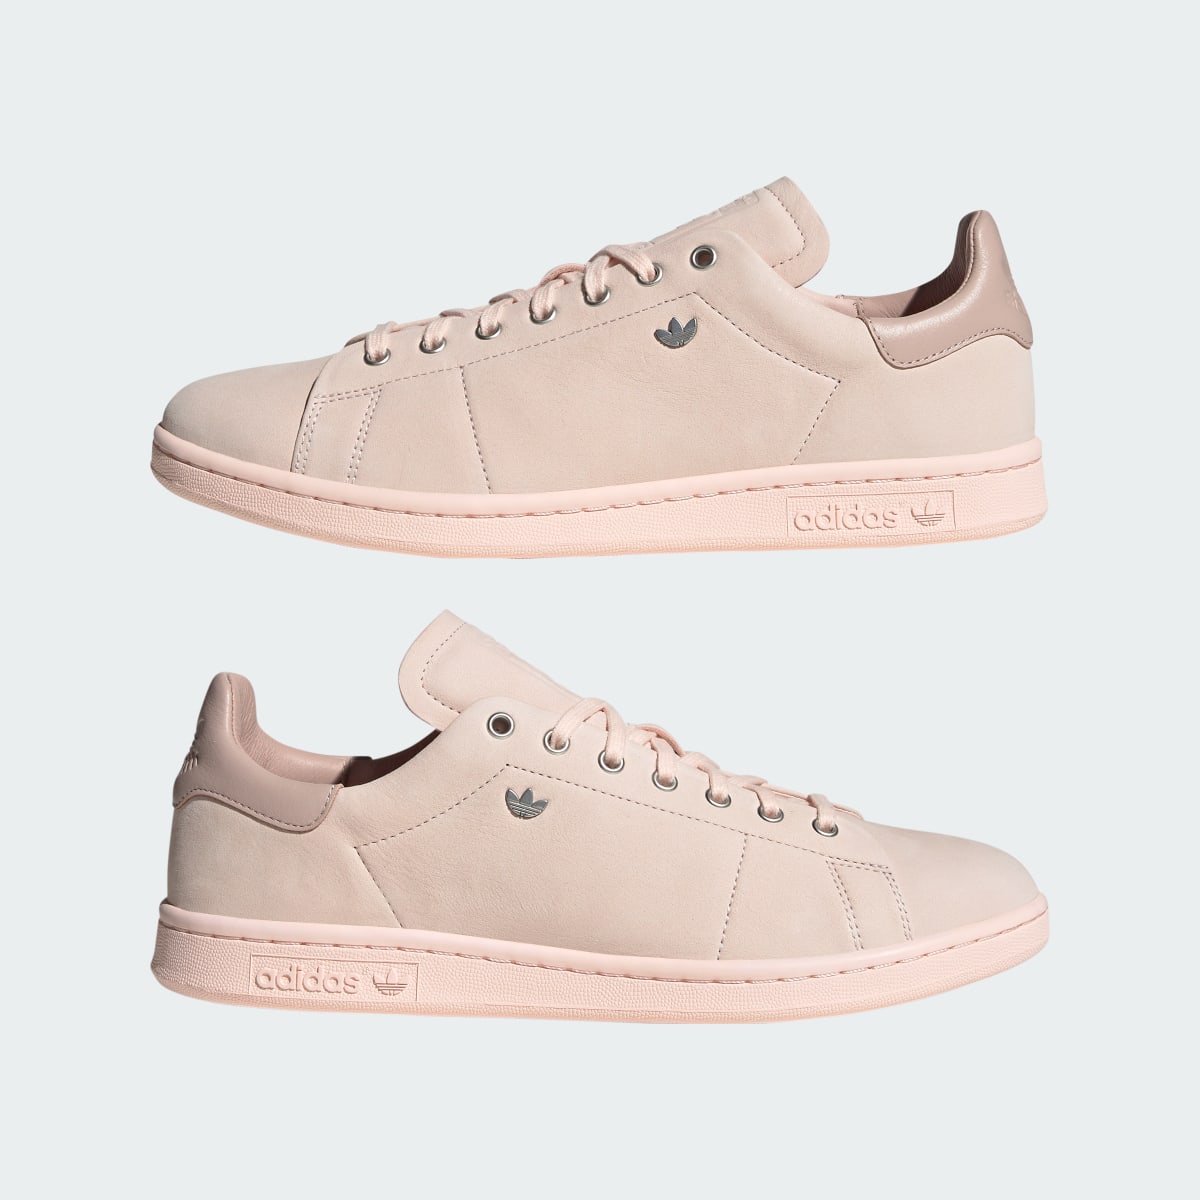 Adidas Stan Smith Lux Shoes. 8